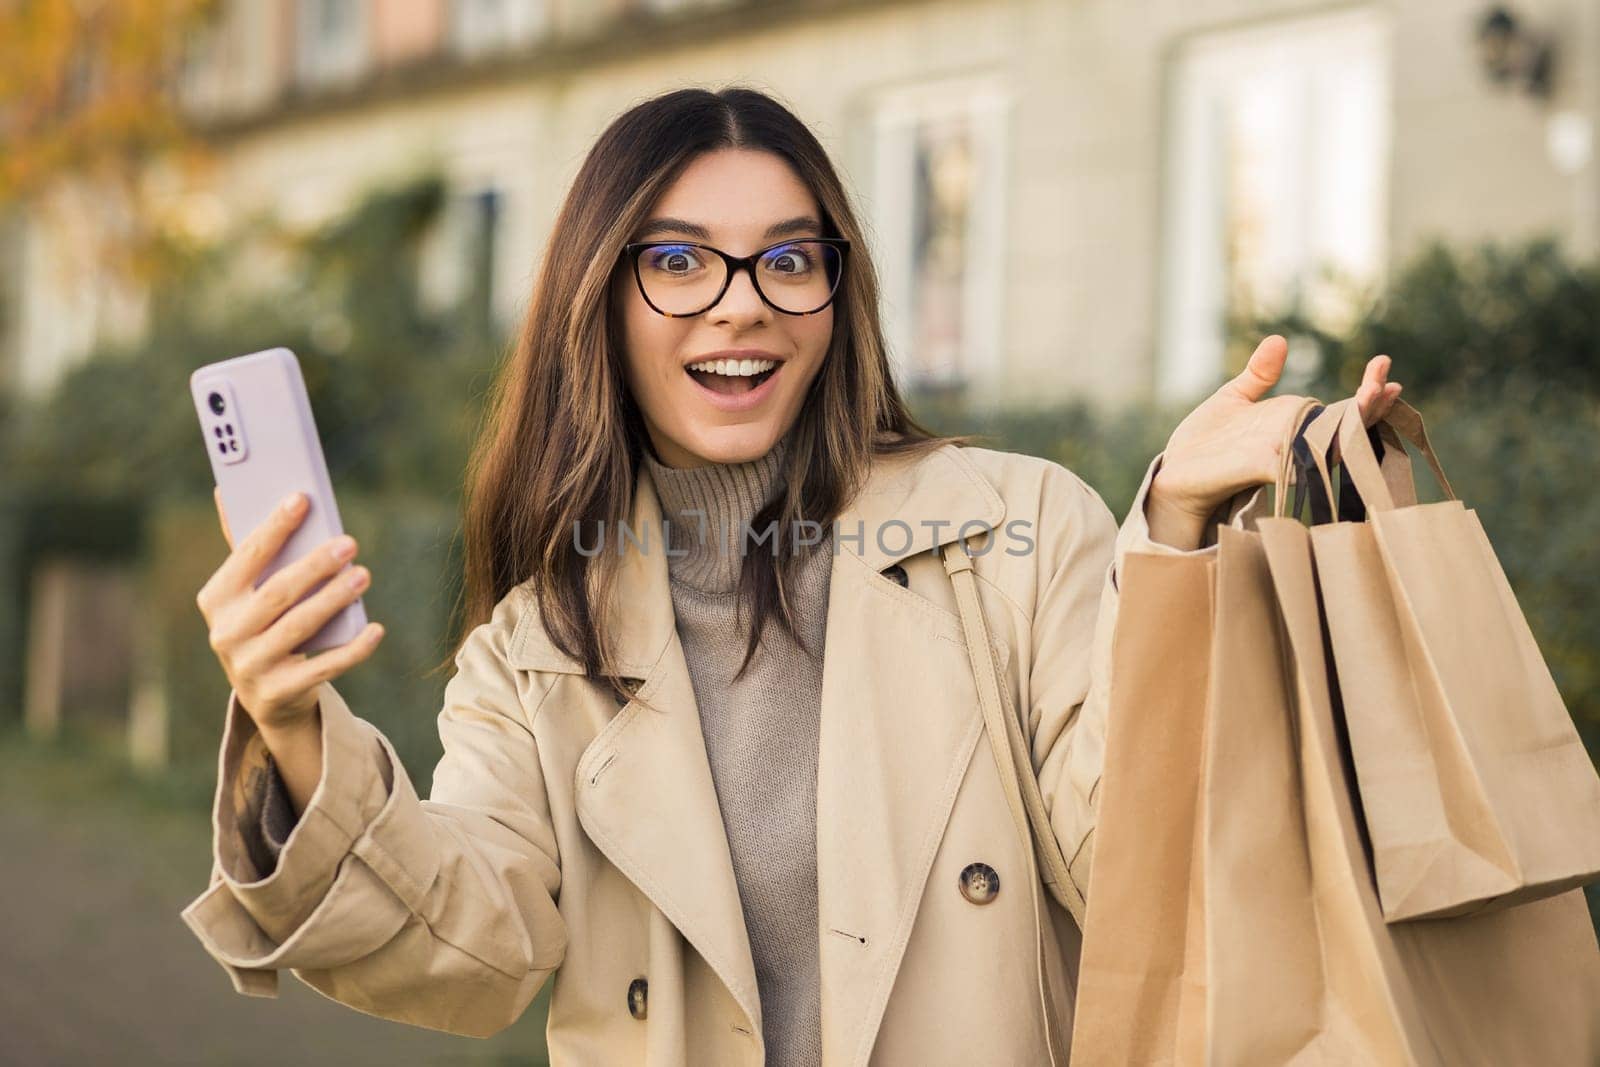 Portrait of attractive happily surprised woman with glasses holding eco-carton shopping bags and a phone in urban street.